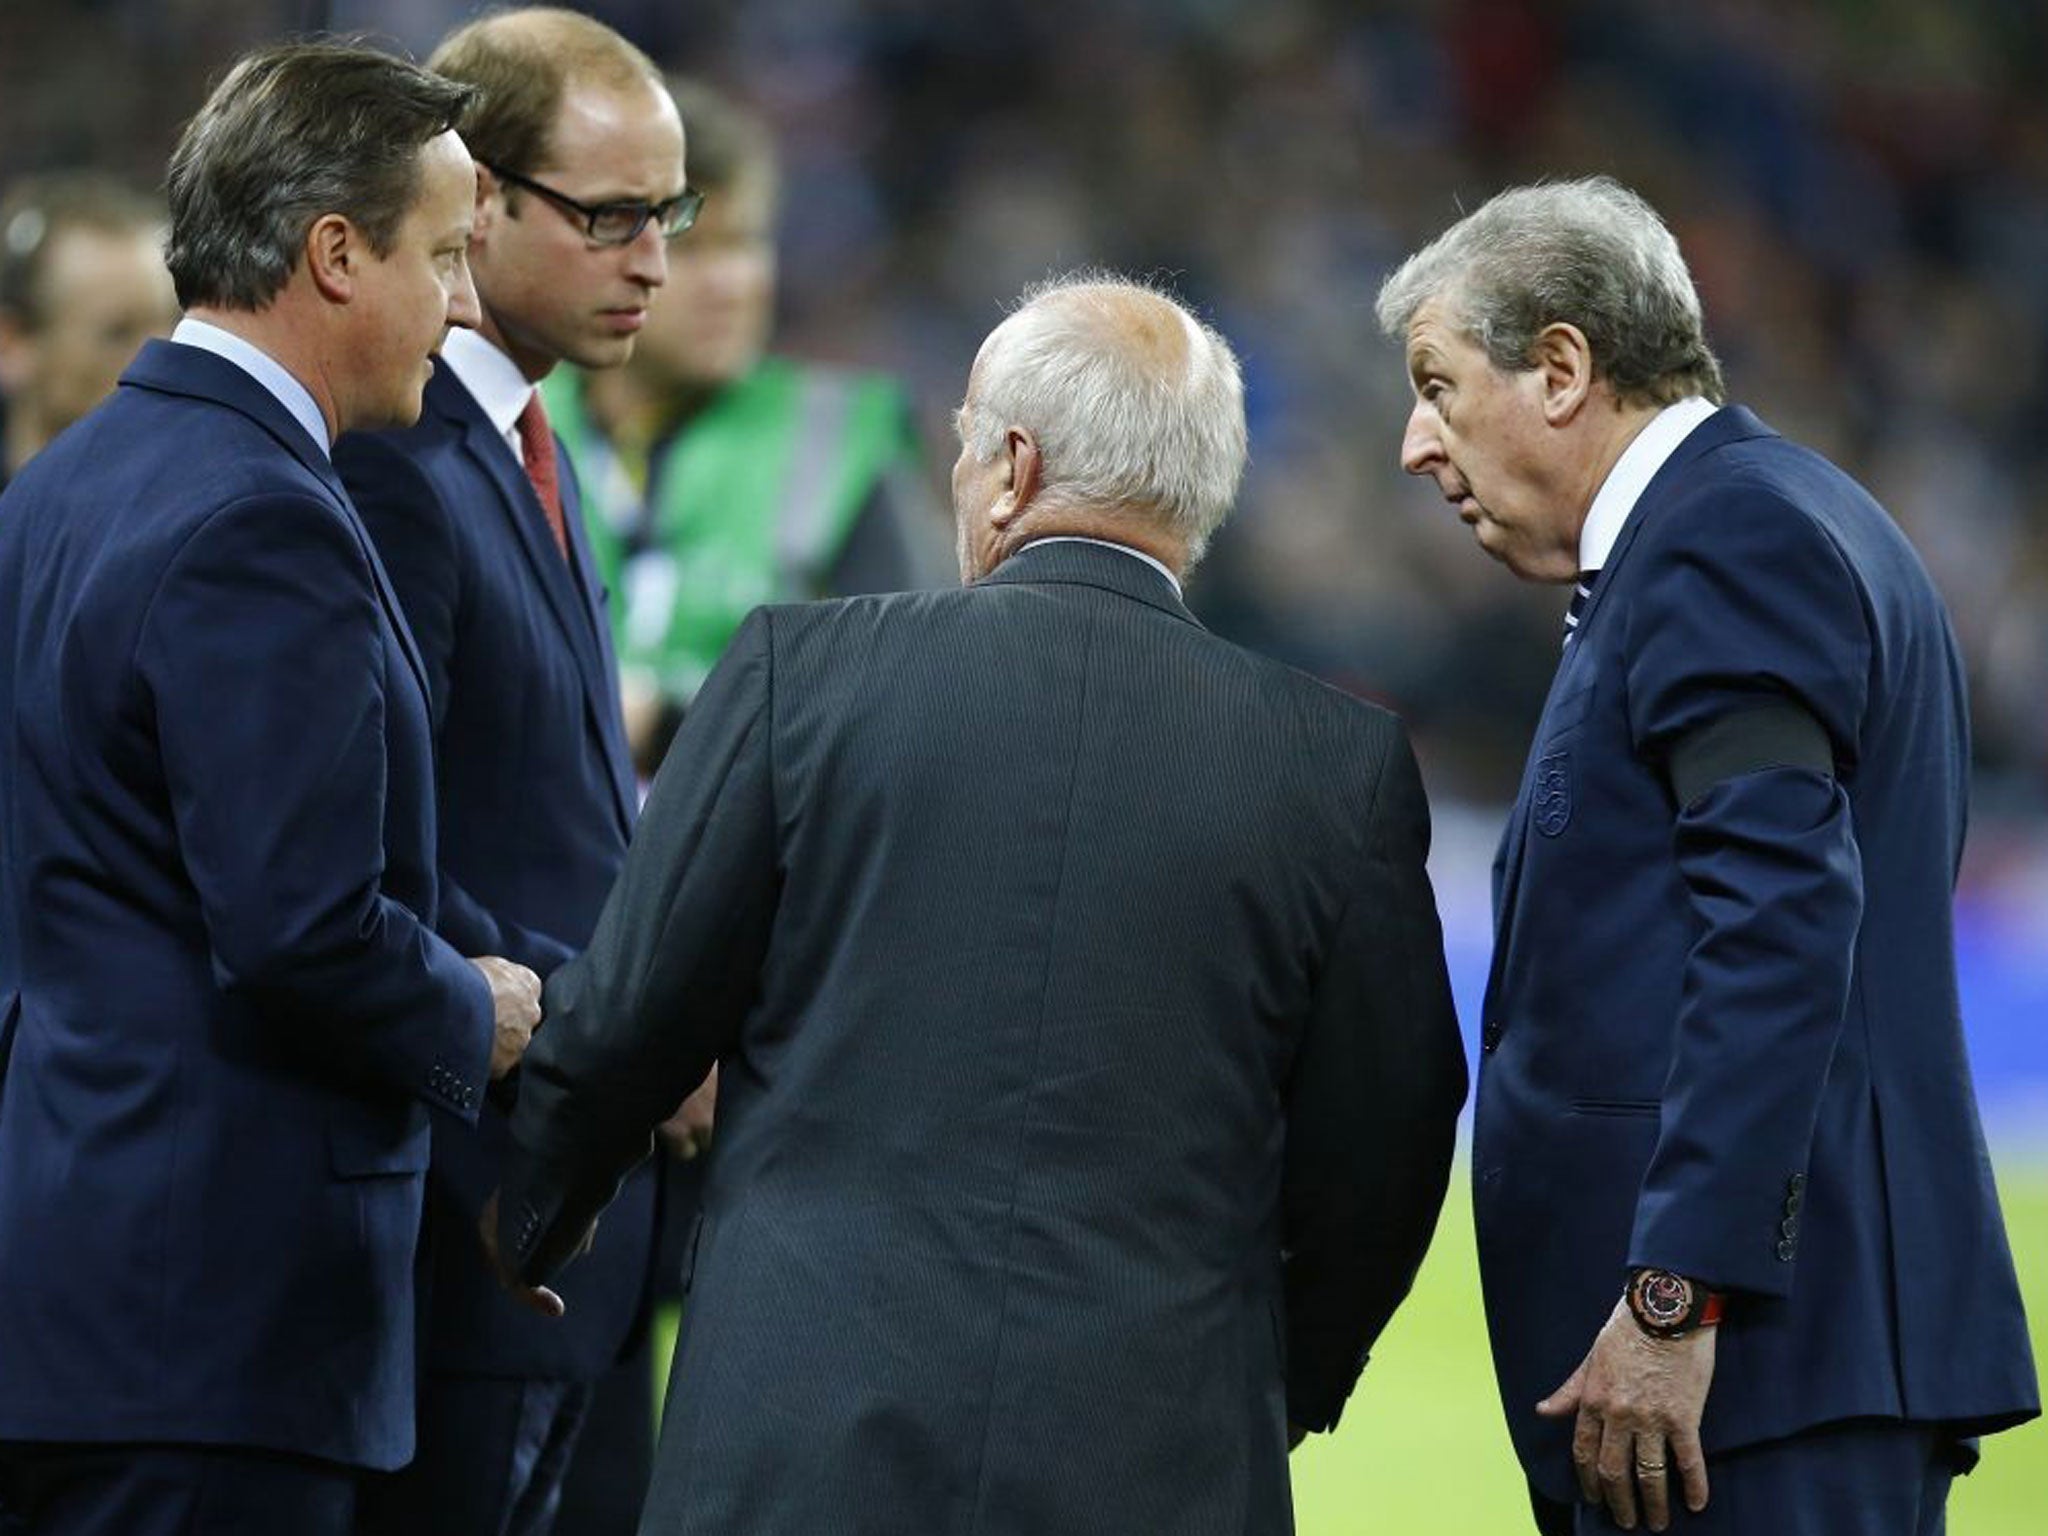 England manager Roy Hodgson speaks with FA Chairman Greg Dyke, Britain's Prince William and David Cameron before the Wembley match against France